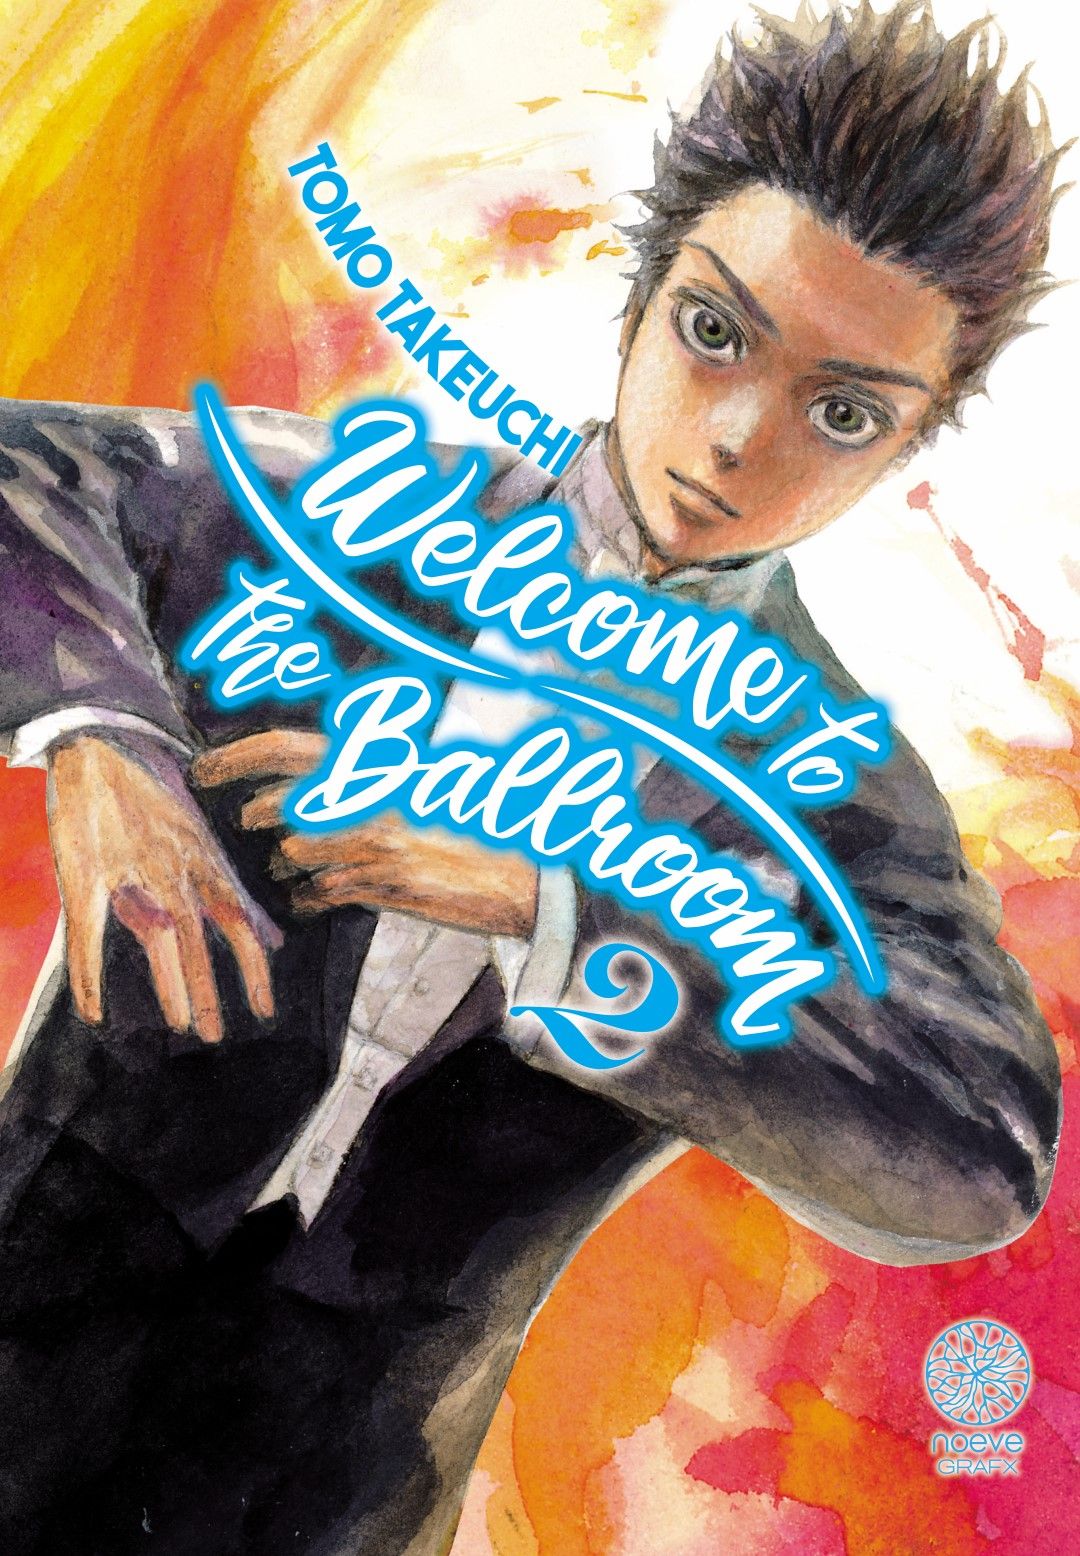 Welcome to the Ballroom Vol.2